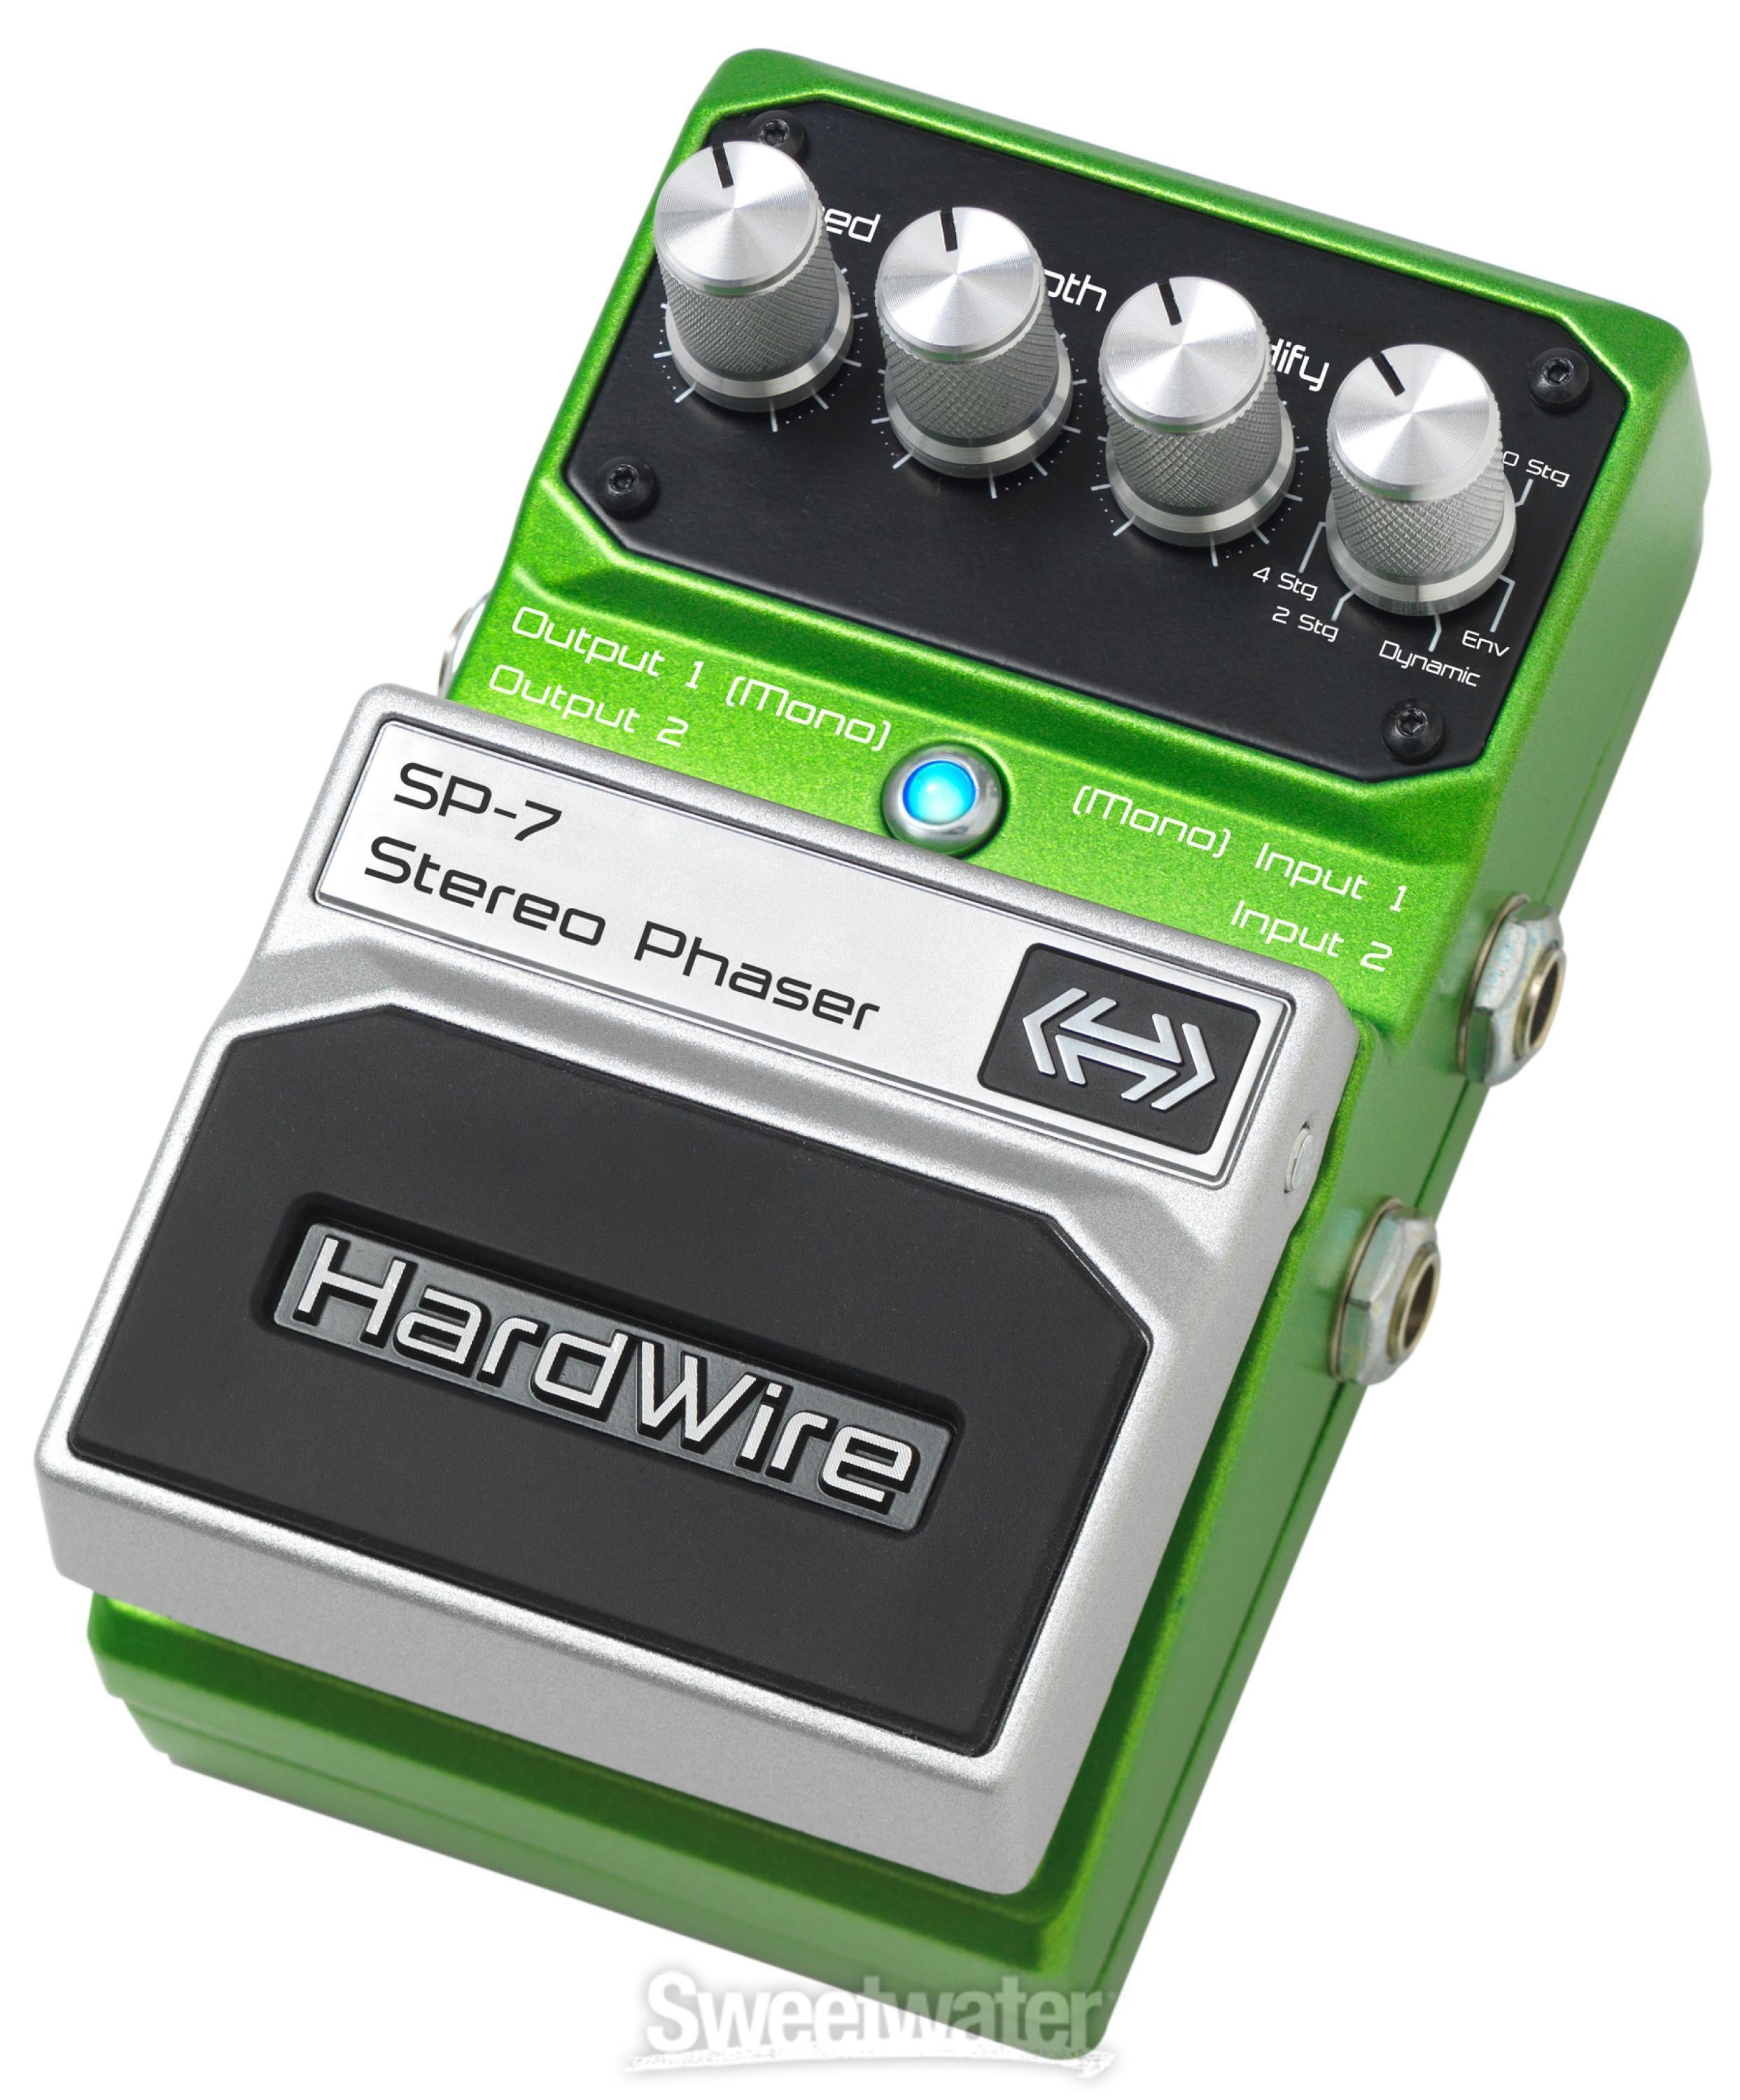 HardWire SP-7 Stereo Phaser Pedal | Sweetwater